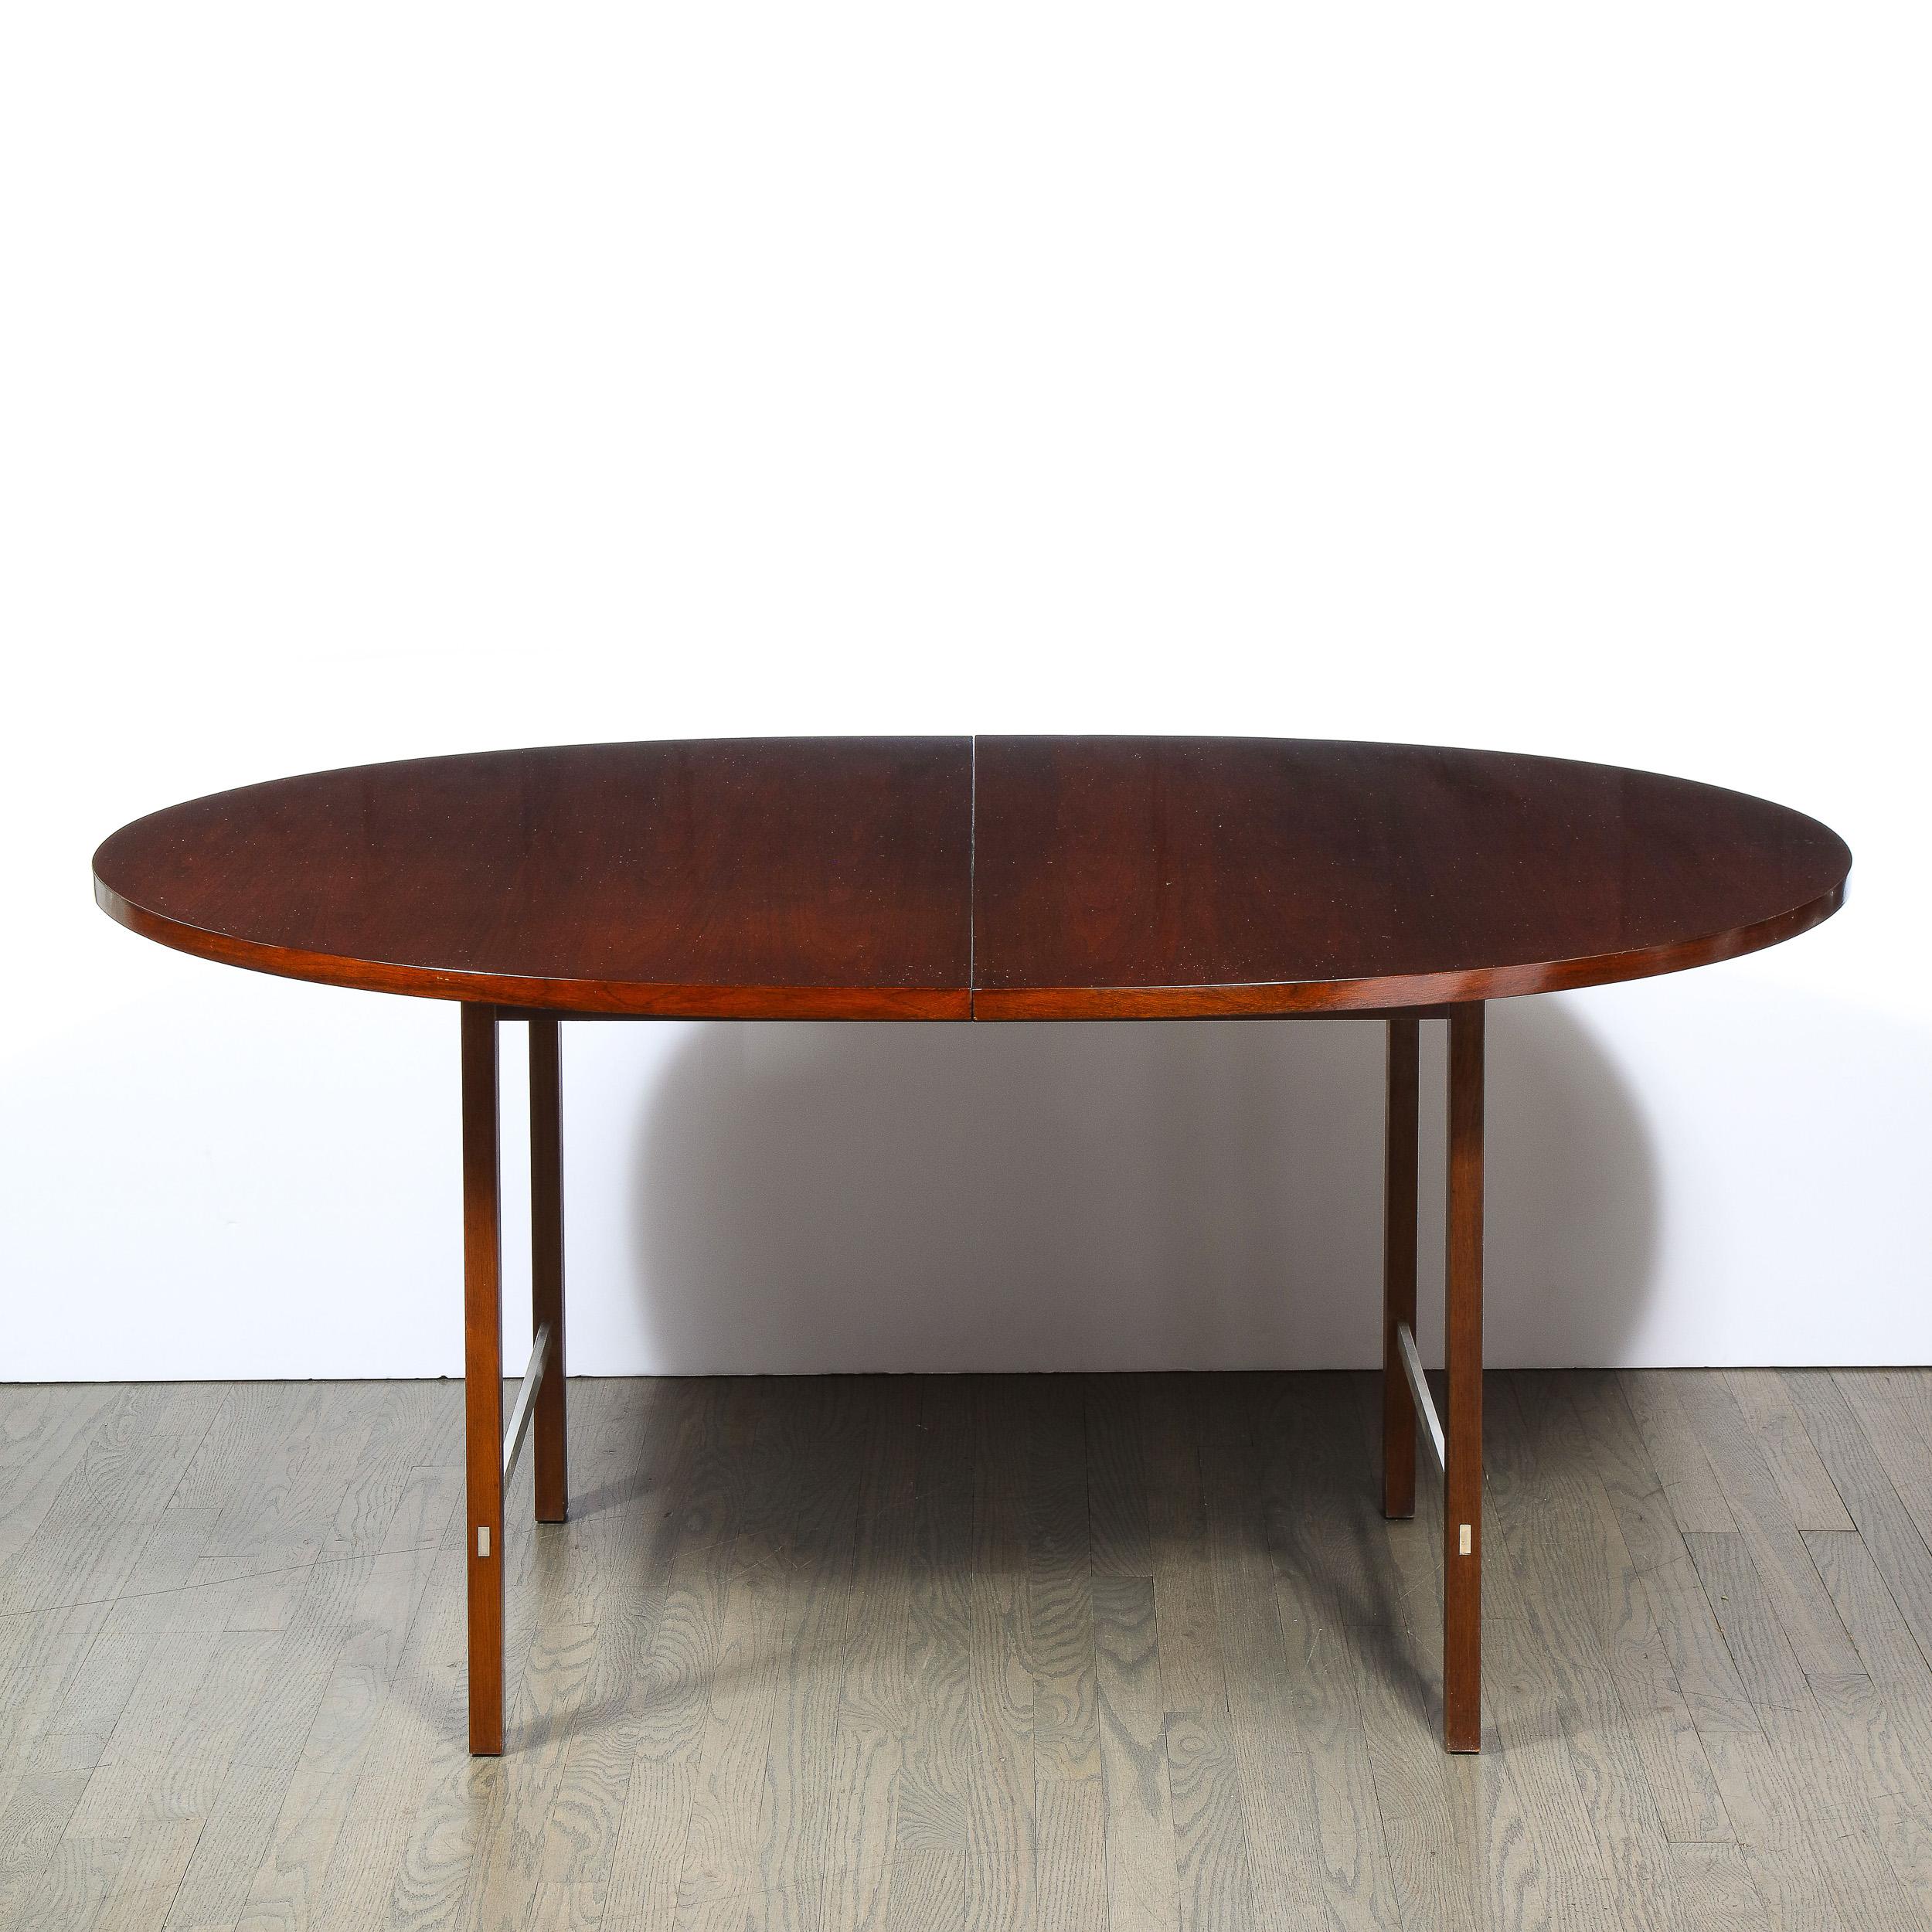 This refined Mid-Century Modern dining table was designed by the legendary Paul McCobb and realized for Calvin Furniture Company in the United States circa 1960. The table features an oval top and four volumetric rectangular legs all in solid